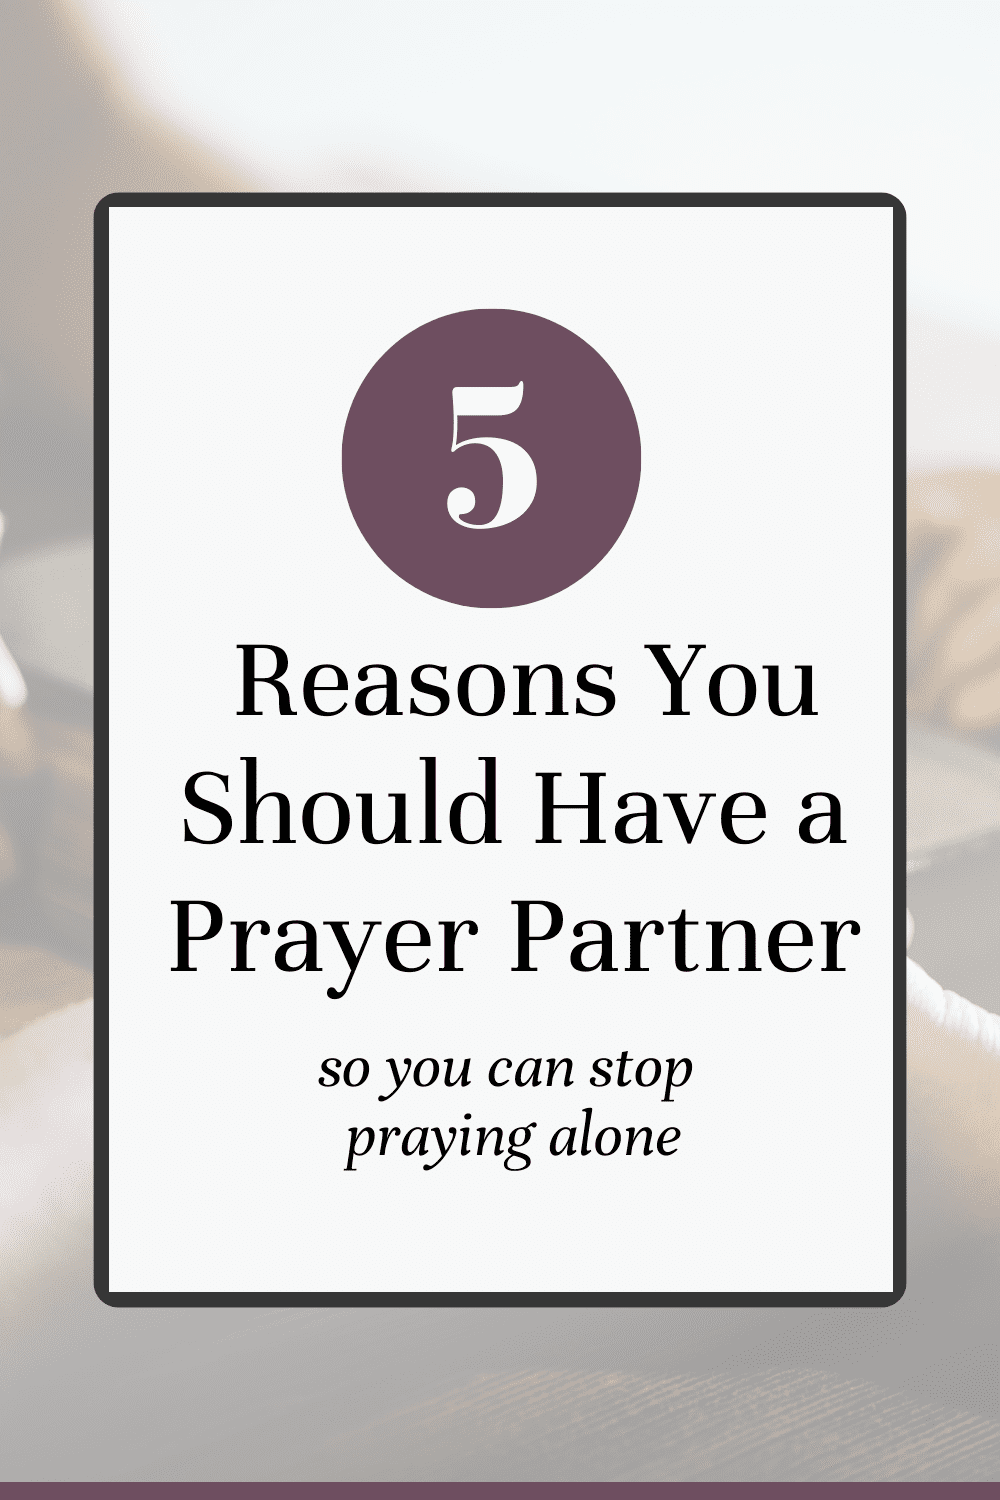 5 reasons everyone should have a prayer partner. When it comes to feeling more confident and consistent with your prayer life doing it in community can make a big difference. Come learn about the benefits of having a prayer partner. Perfect for beginners learning how to pray.